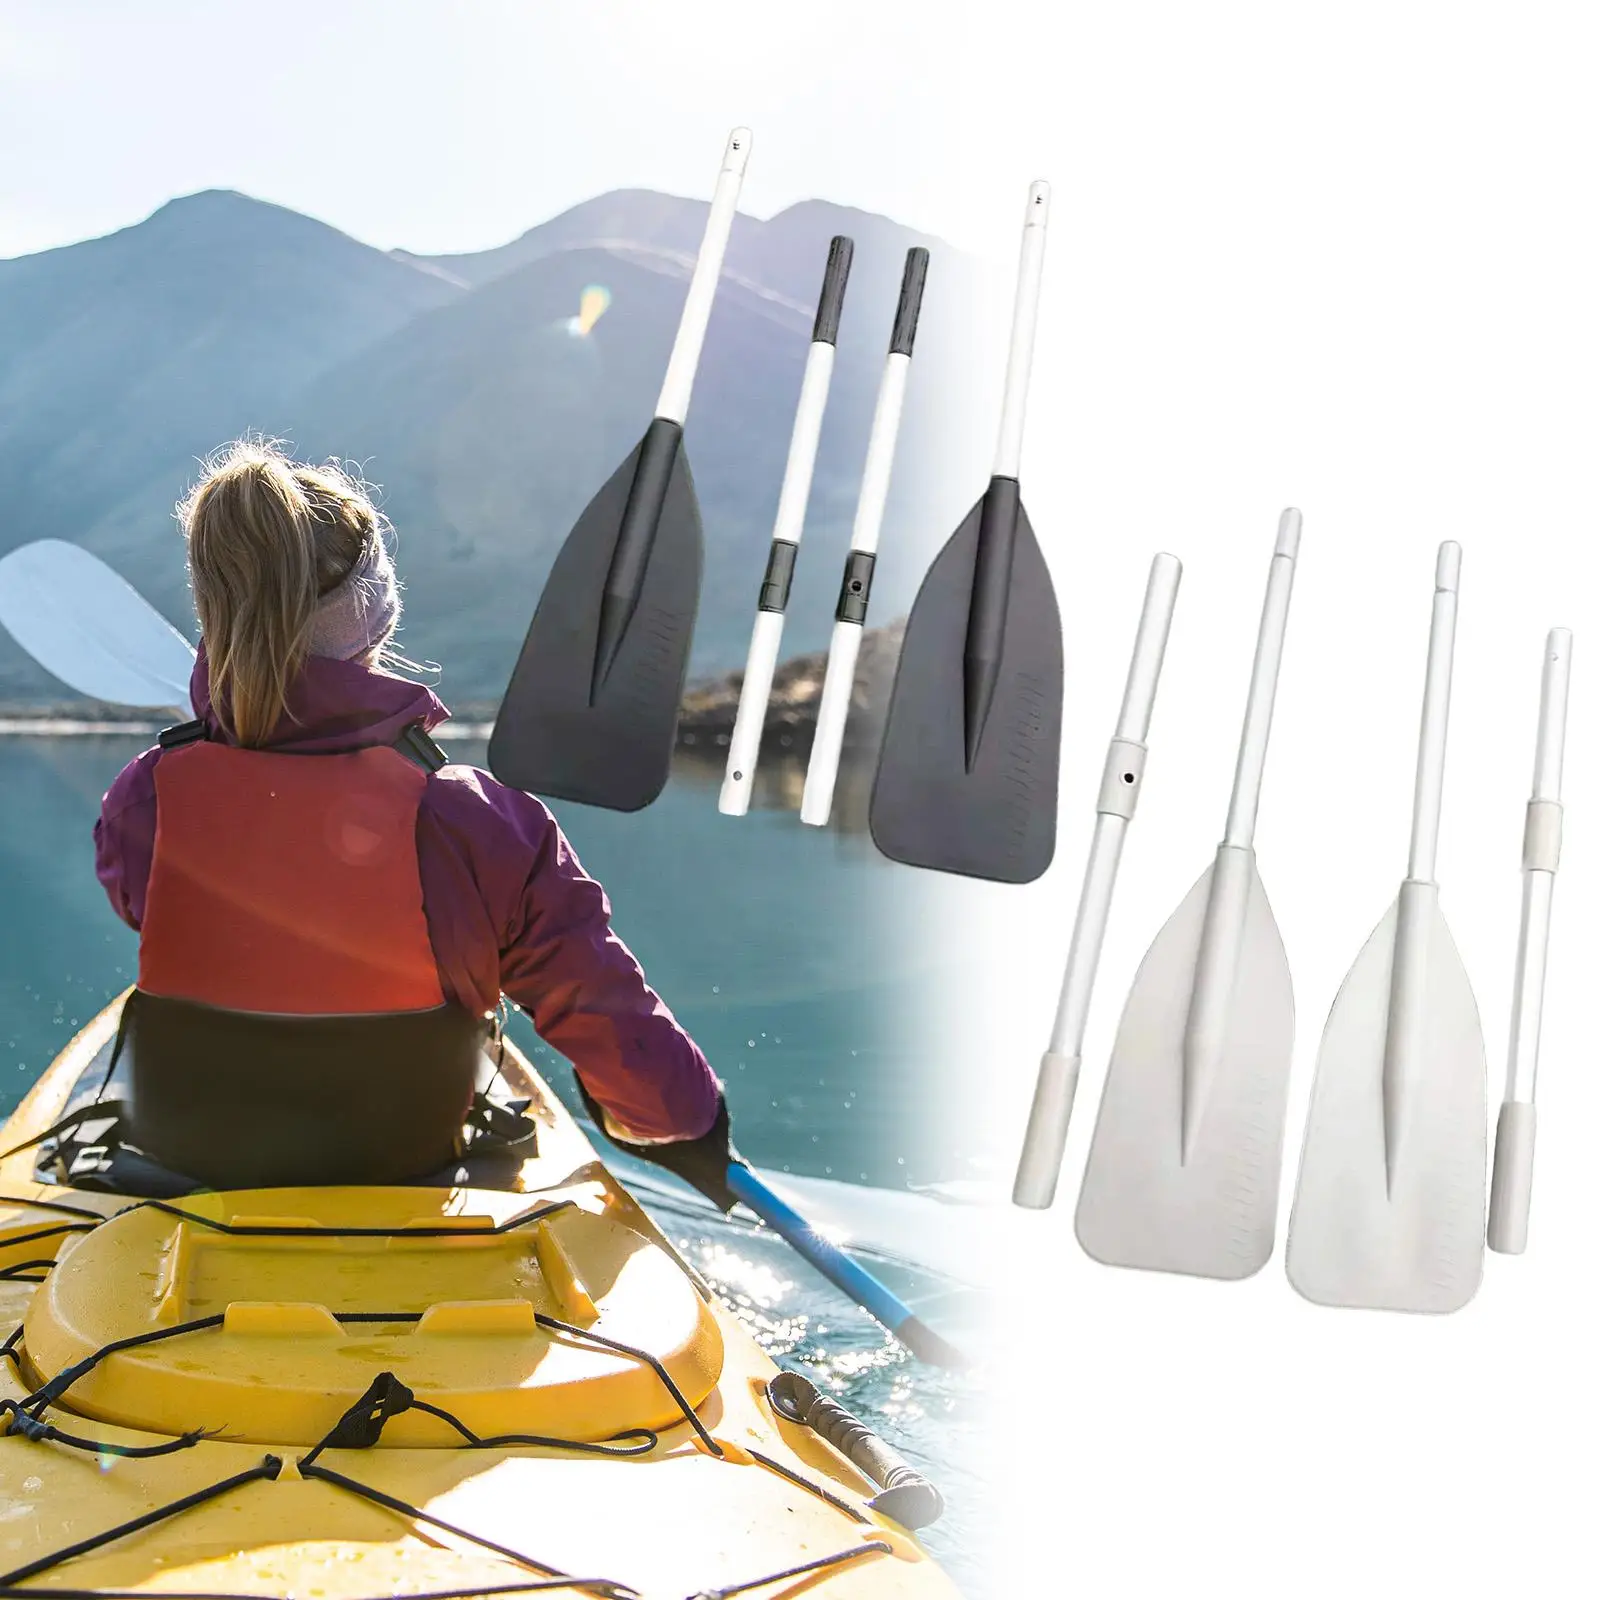 2Pcs Kayak Paddle Removable Accessories Lightweight Aluminum Alloy for Canoeing